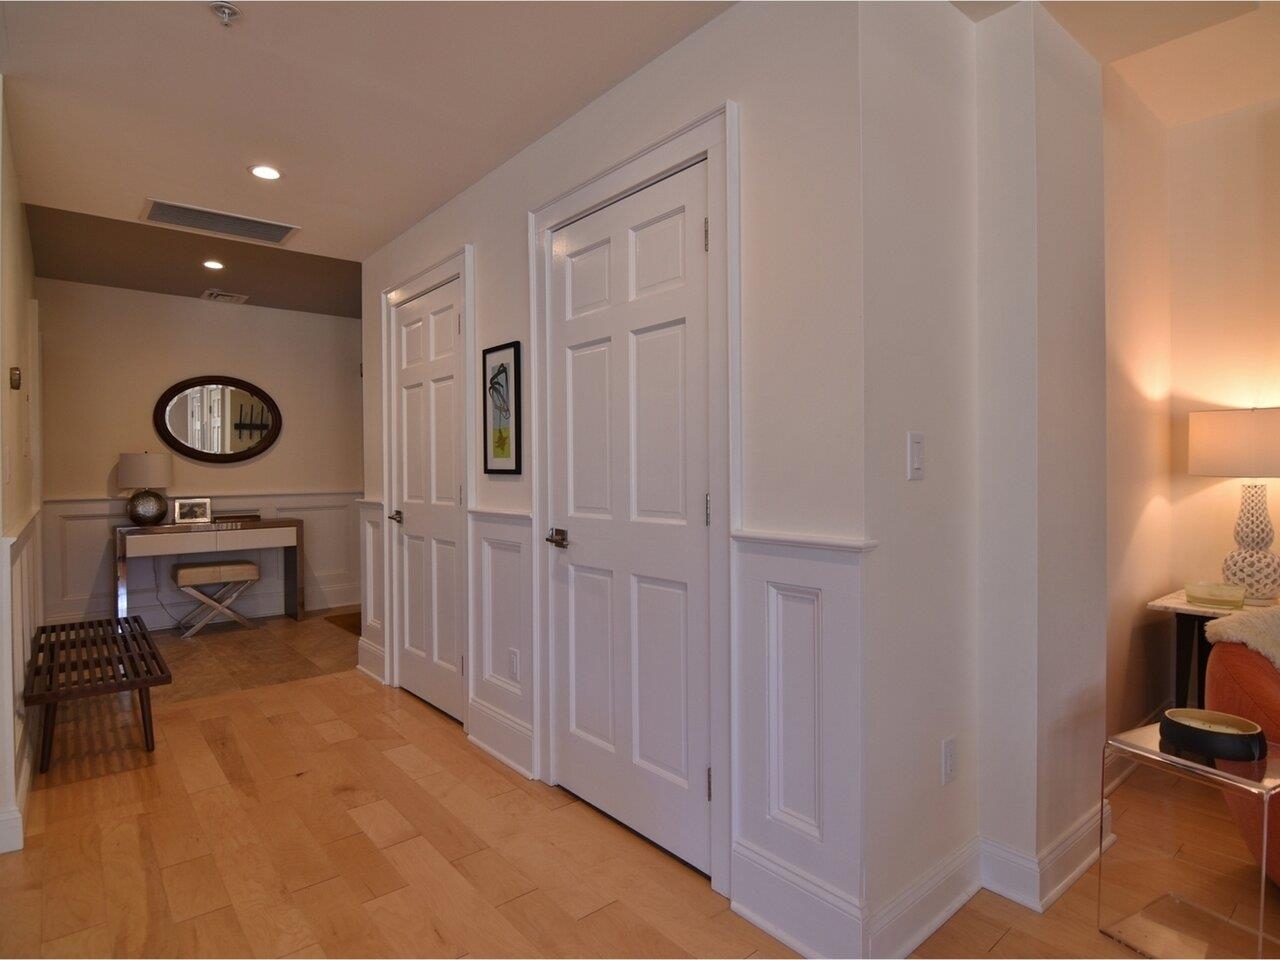 Entry hall to back bedrooms